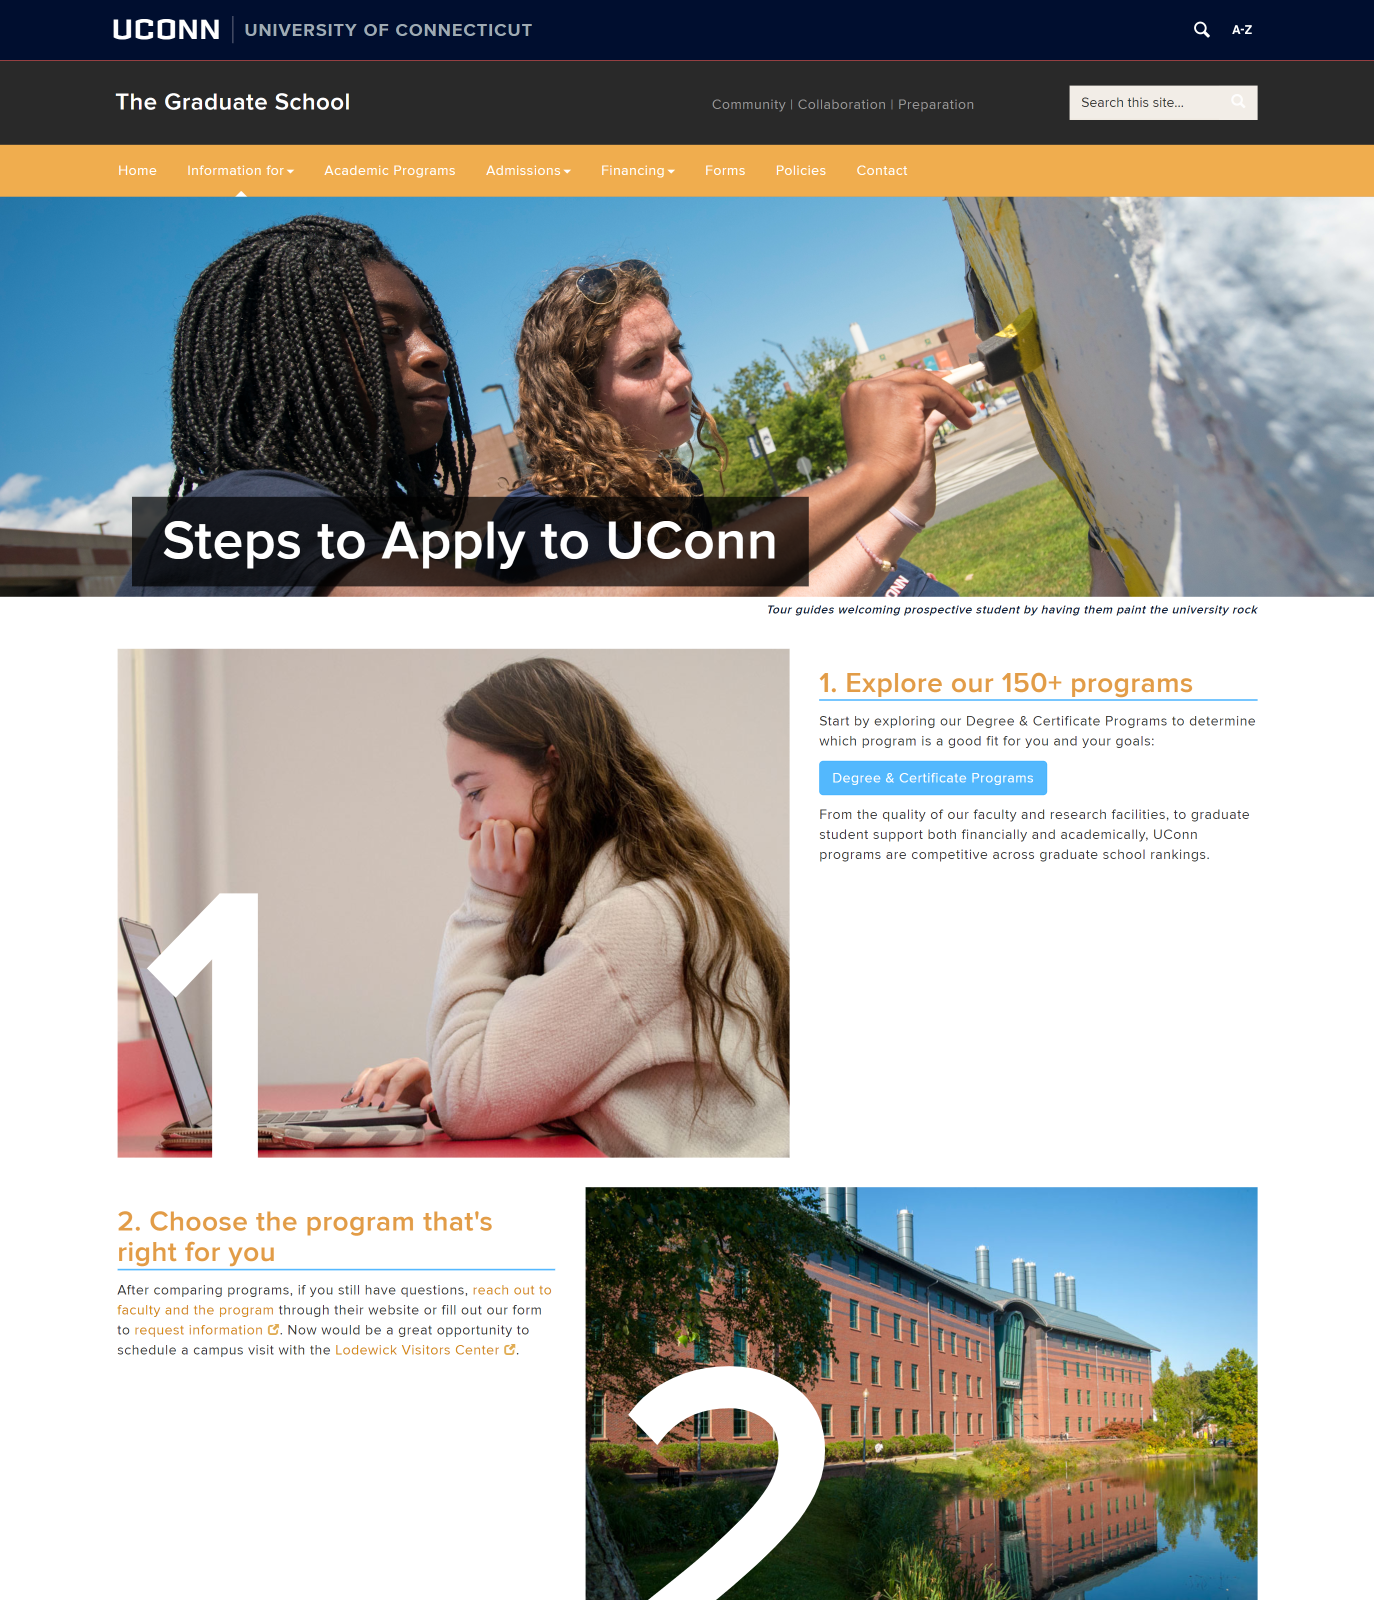 Screenshot of an interior page of the Graduate School website